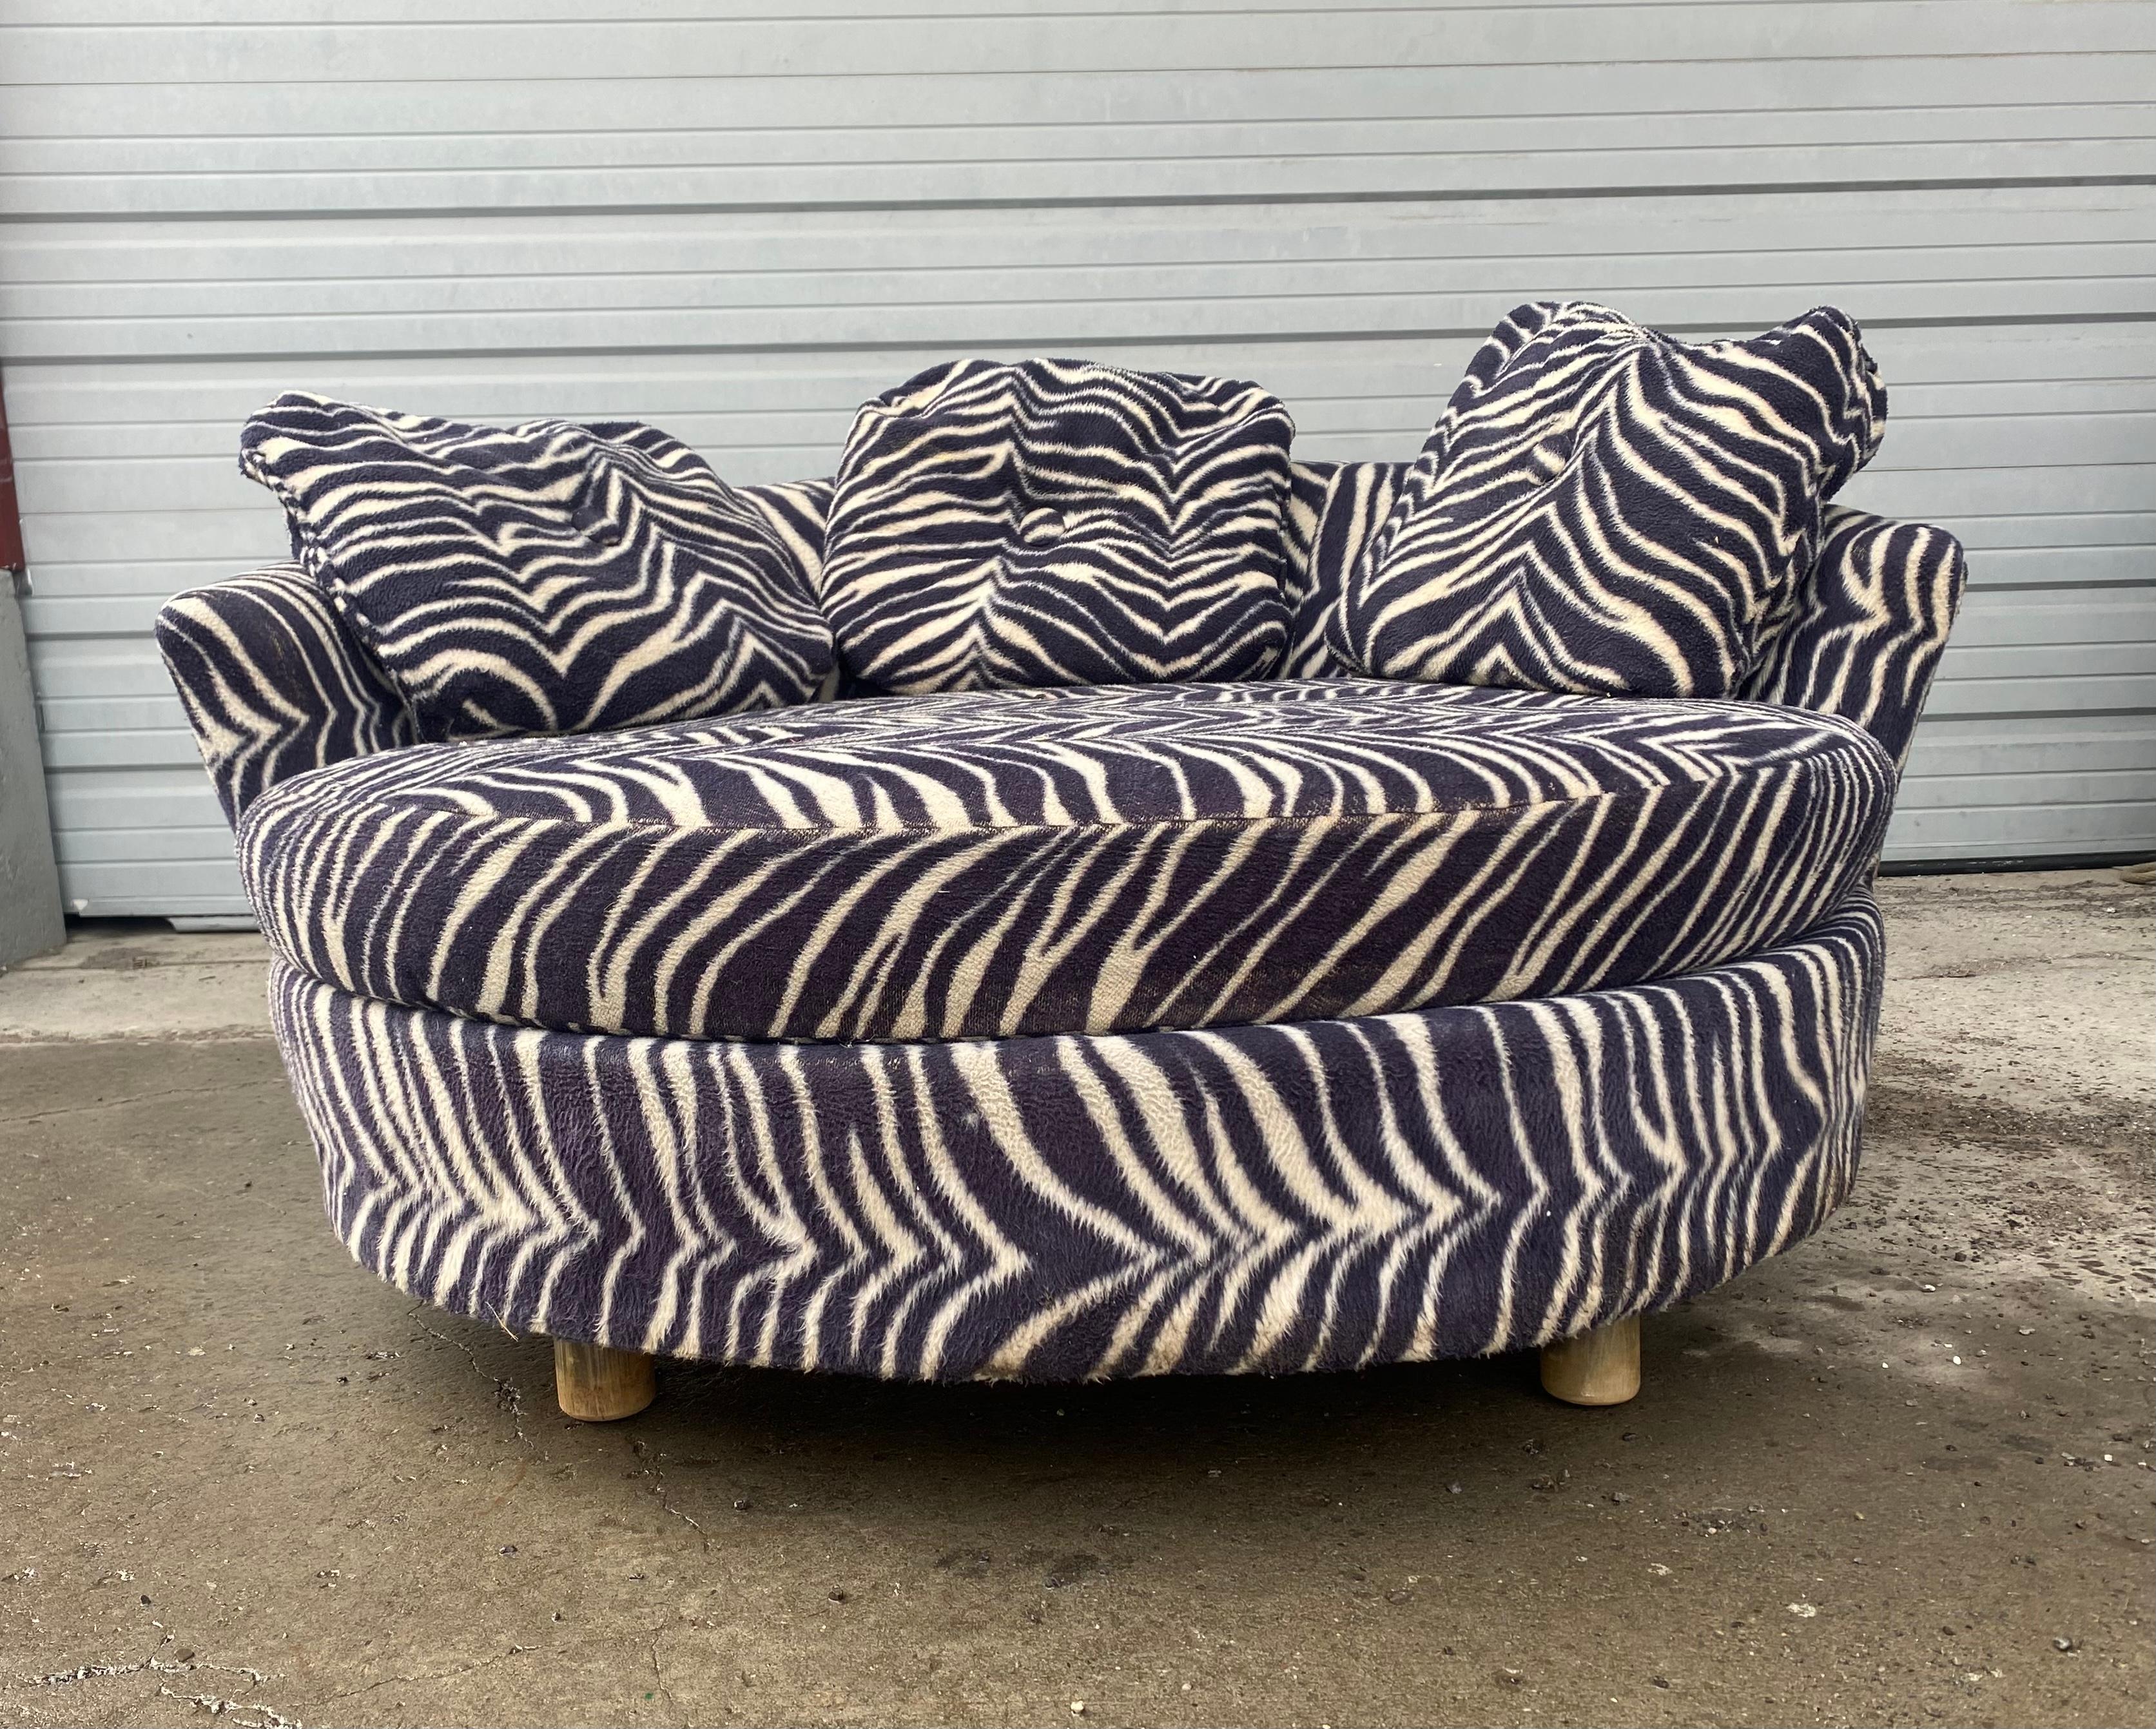 Super stylized sphere, round lounge chair, chaise lounge, in the manner of Adrian Pearsall and Milo Baughman, Retains its original faux zebra fabric in useable condition, in need of a good cleaning, large round seat cushion, missing button and small